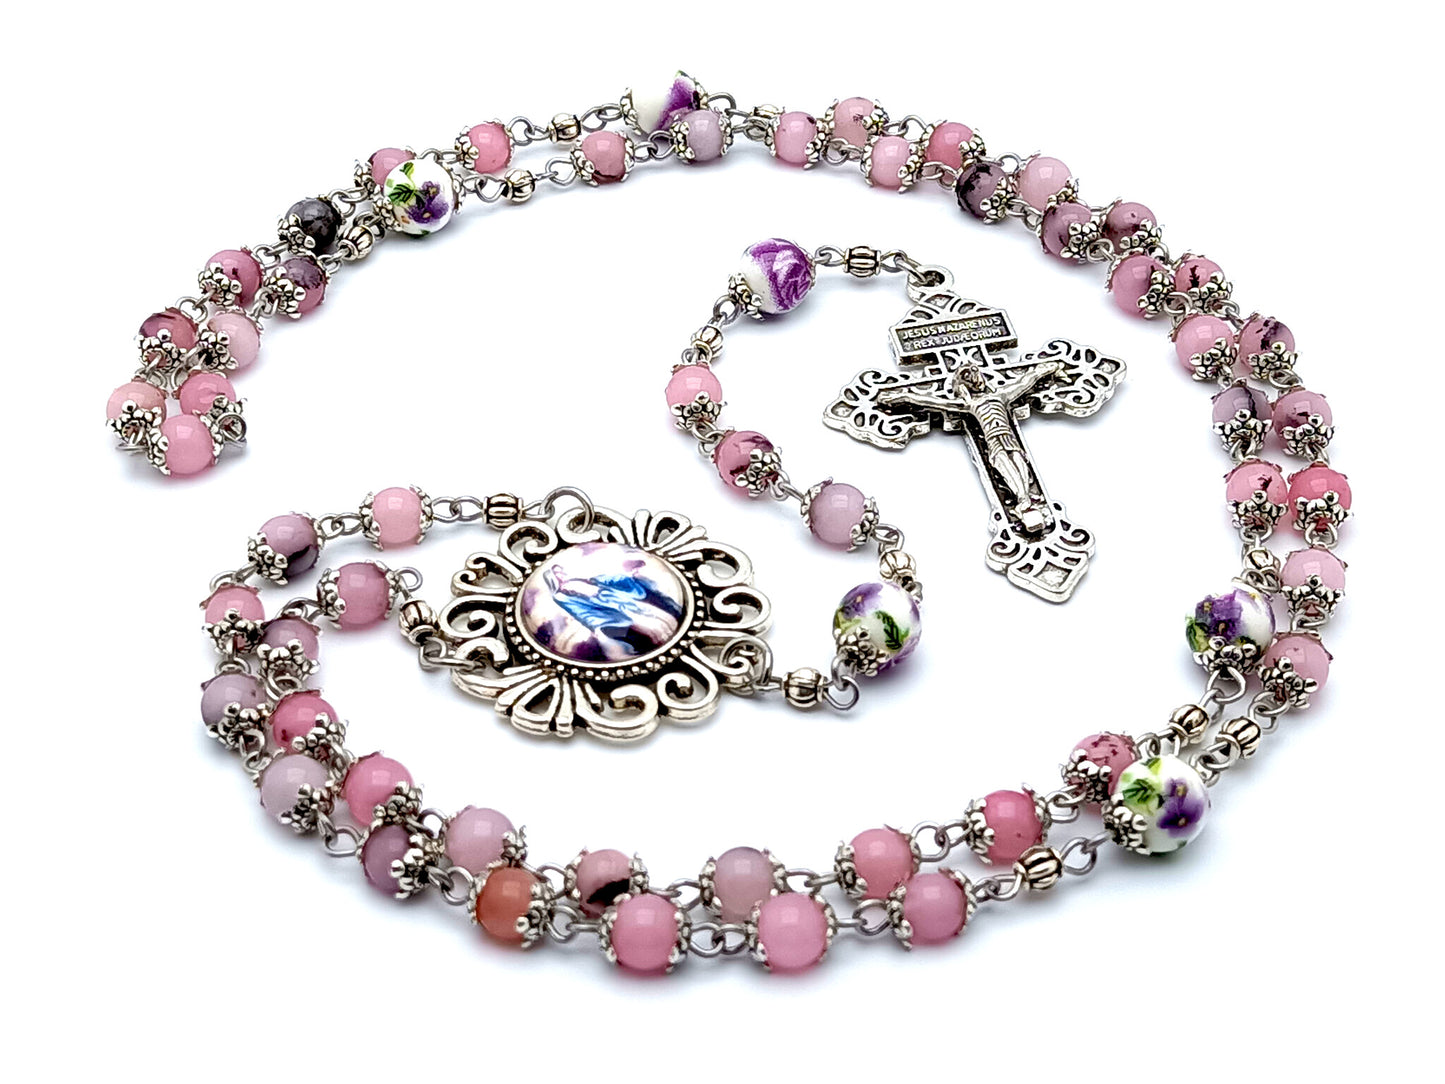 Our Lady of Grace unique rosary beads with agate gemstone and floral porcelain Our Father beads and silver pardon crucifix.